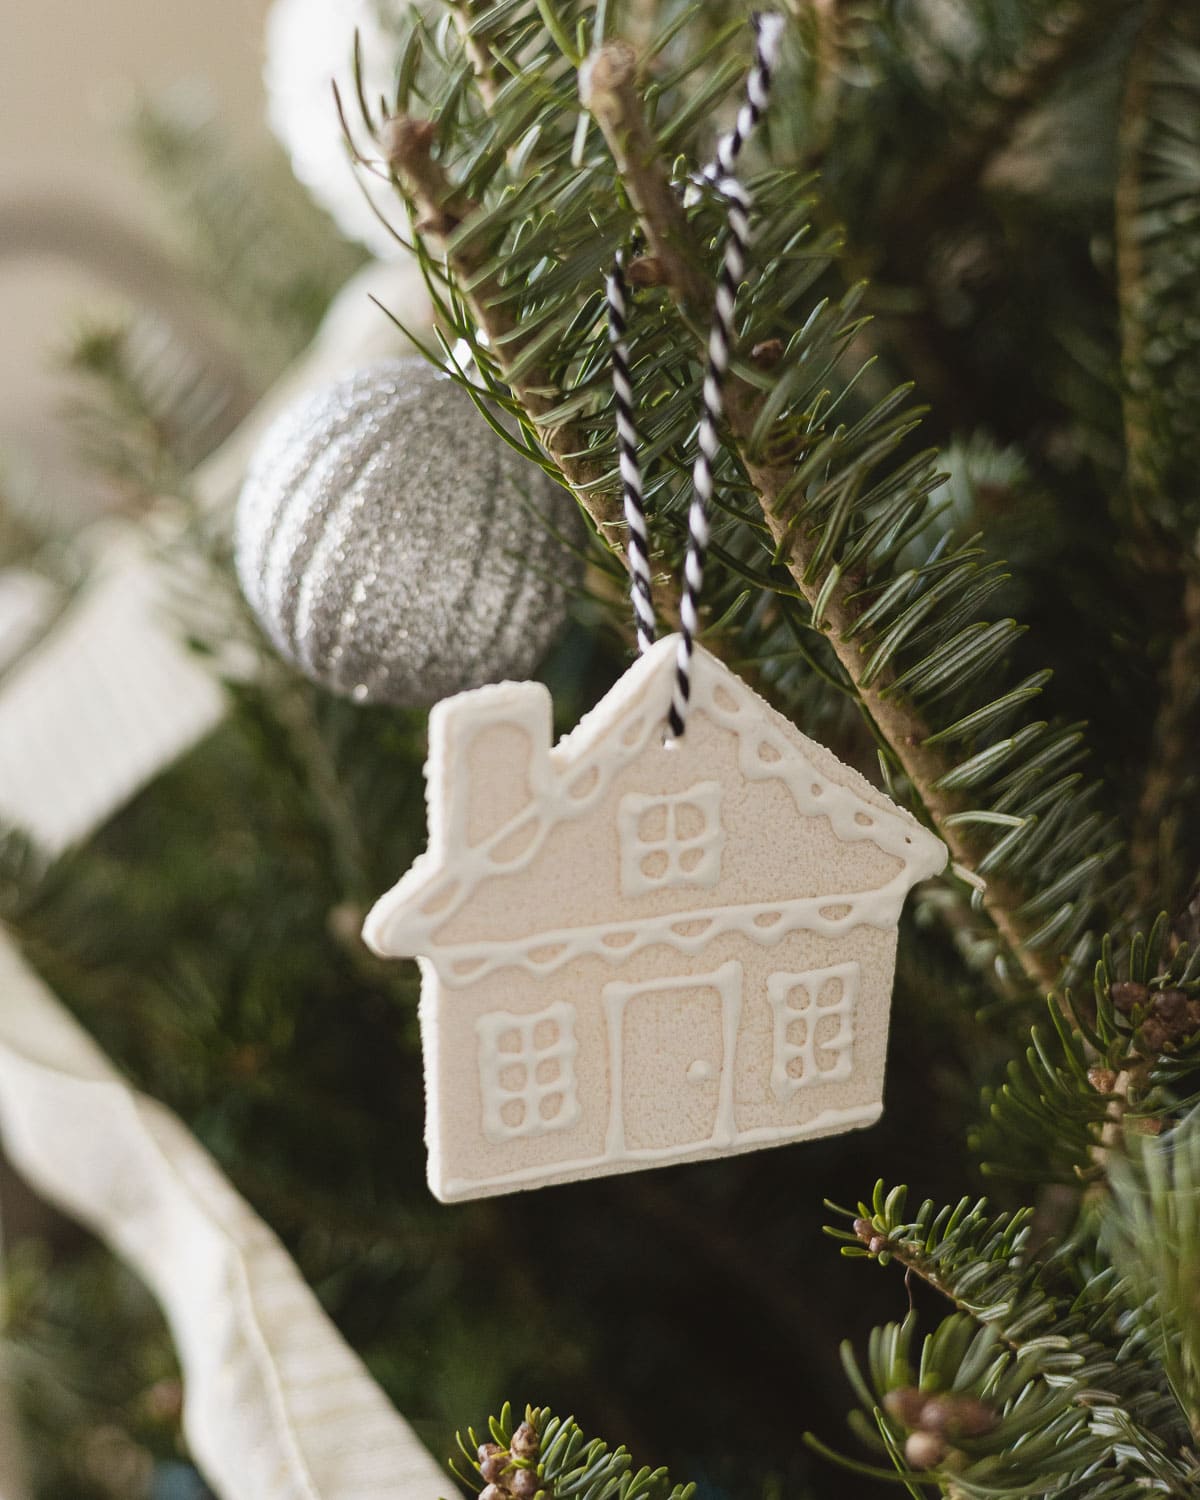 A salt dough ornament cut in the shape of a house hanging on a pine tree.